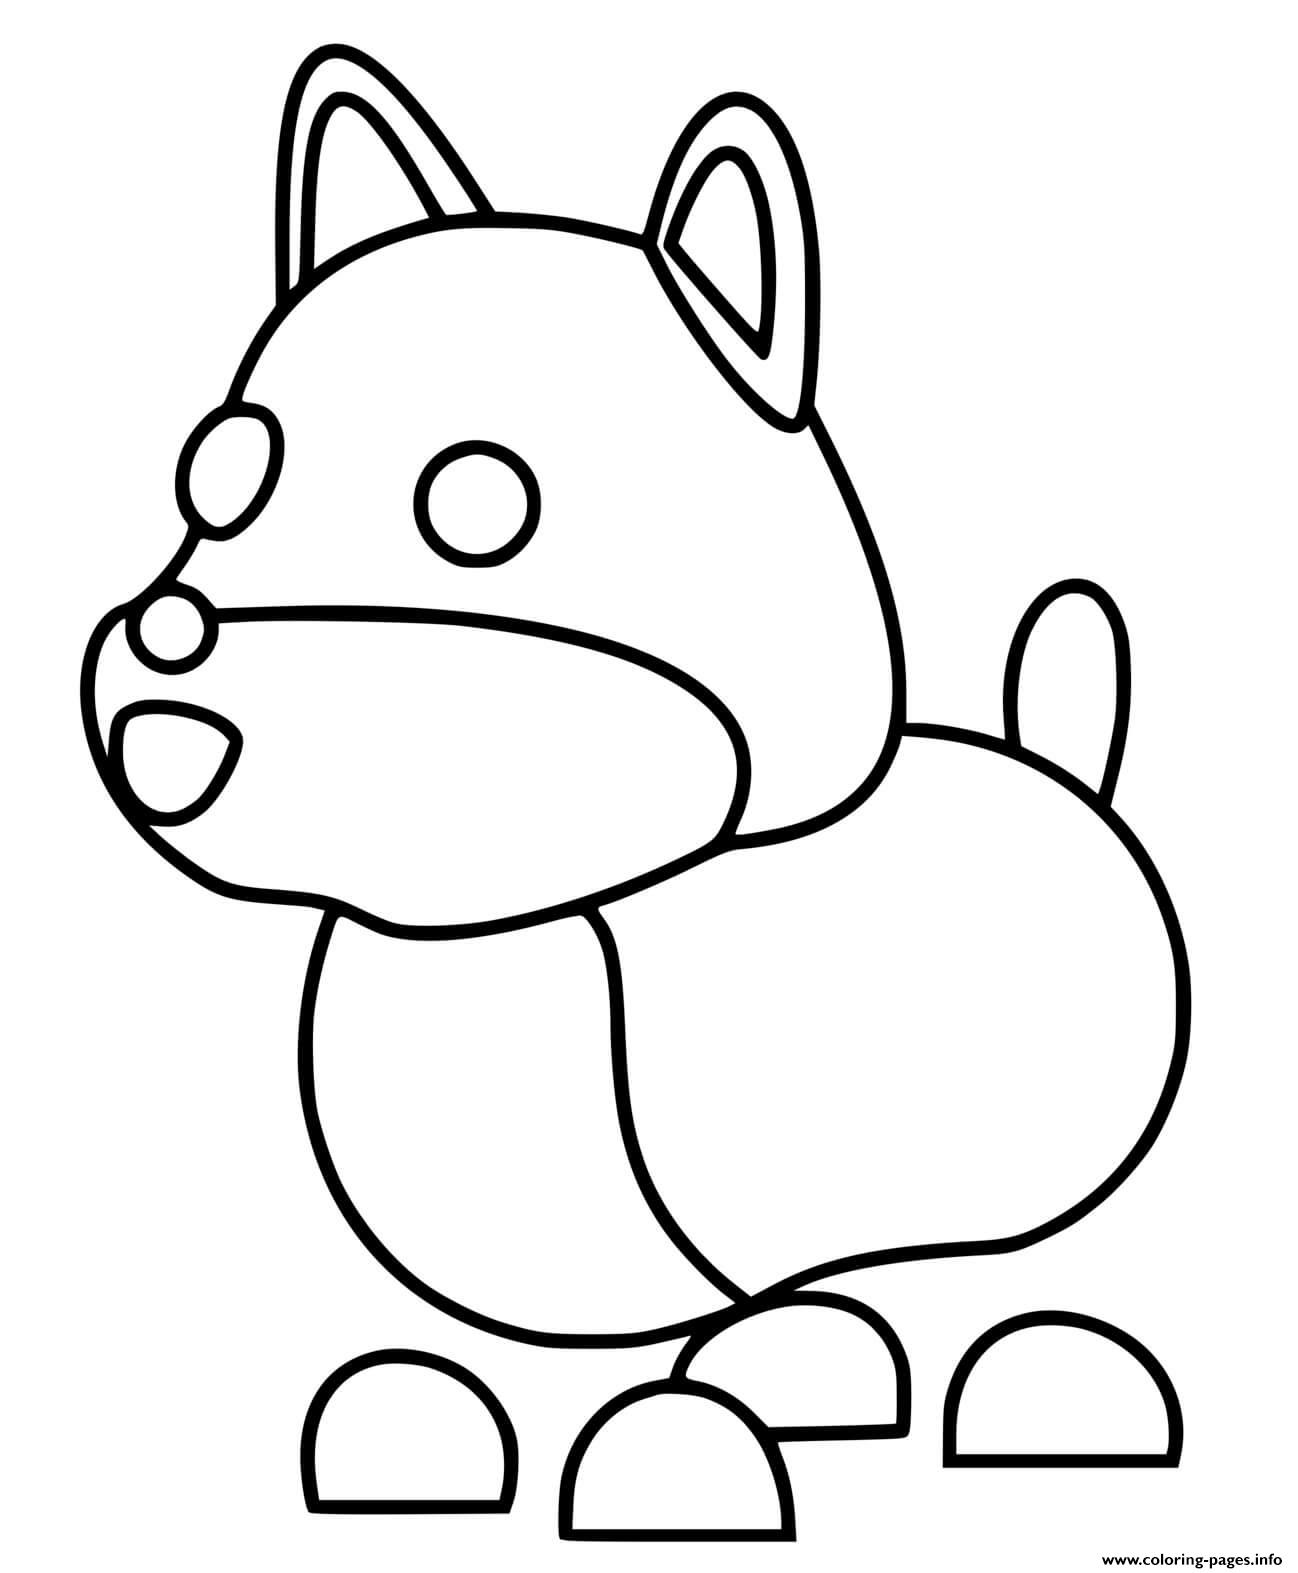 Roblox Adopt Me Shiba Inu Coloring Pages Printable - shiva inu in roblox adopt me